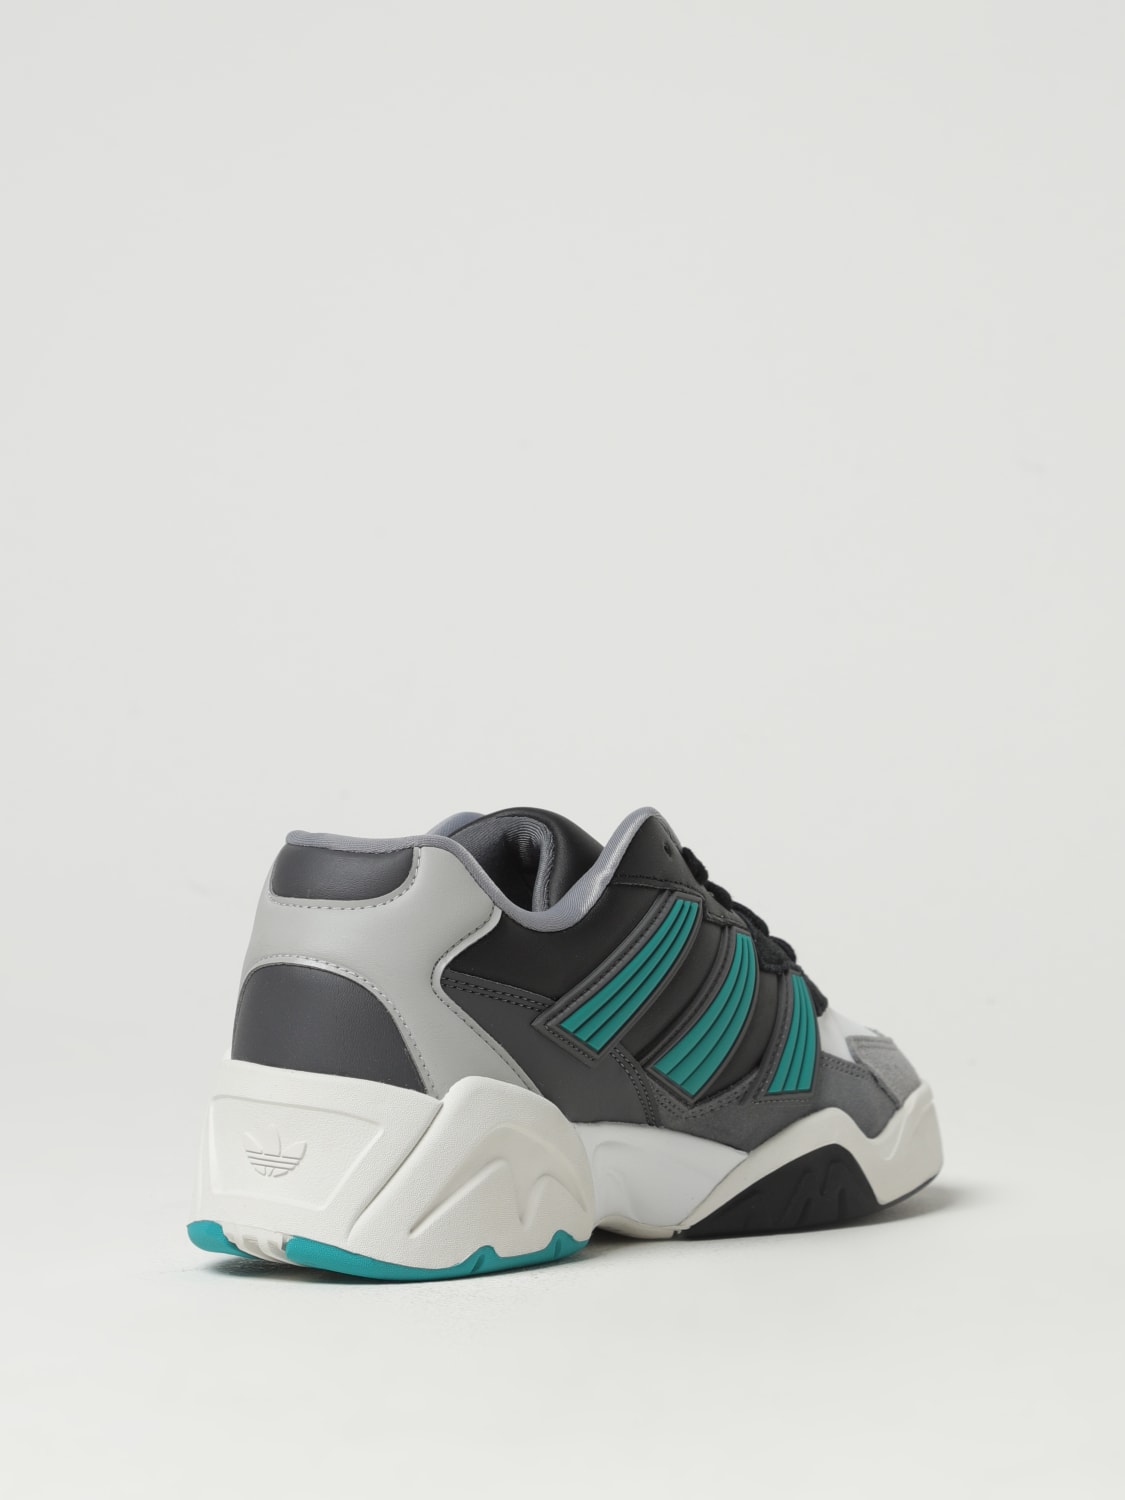 ADIDAS ORIGINALS: Court Magnetic sneakers sneakers online at and Grey Originals rubber - leather IF5378 in | Adidas